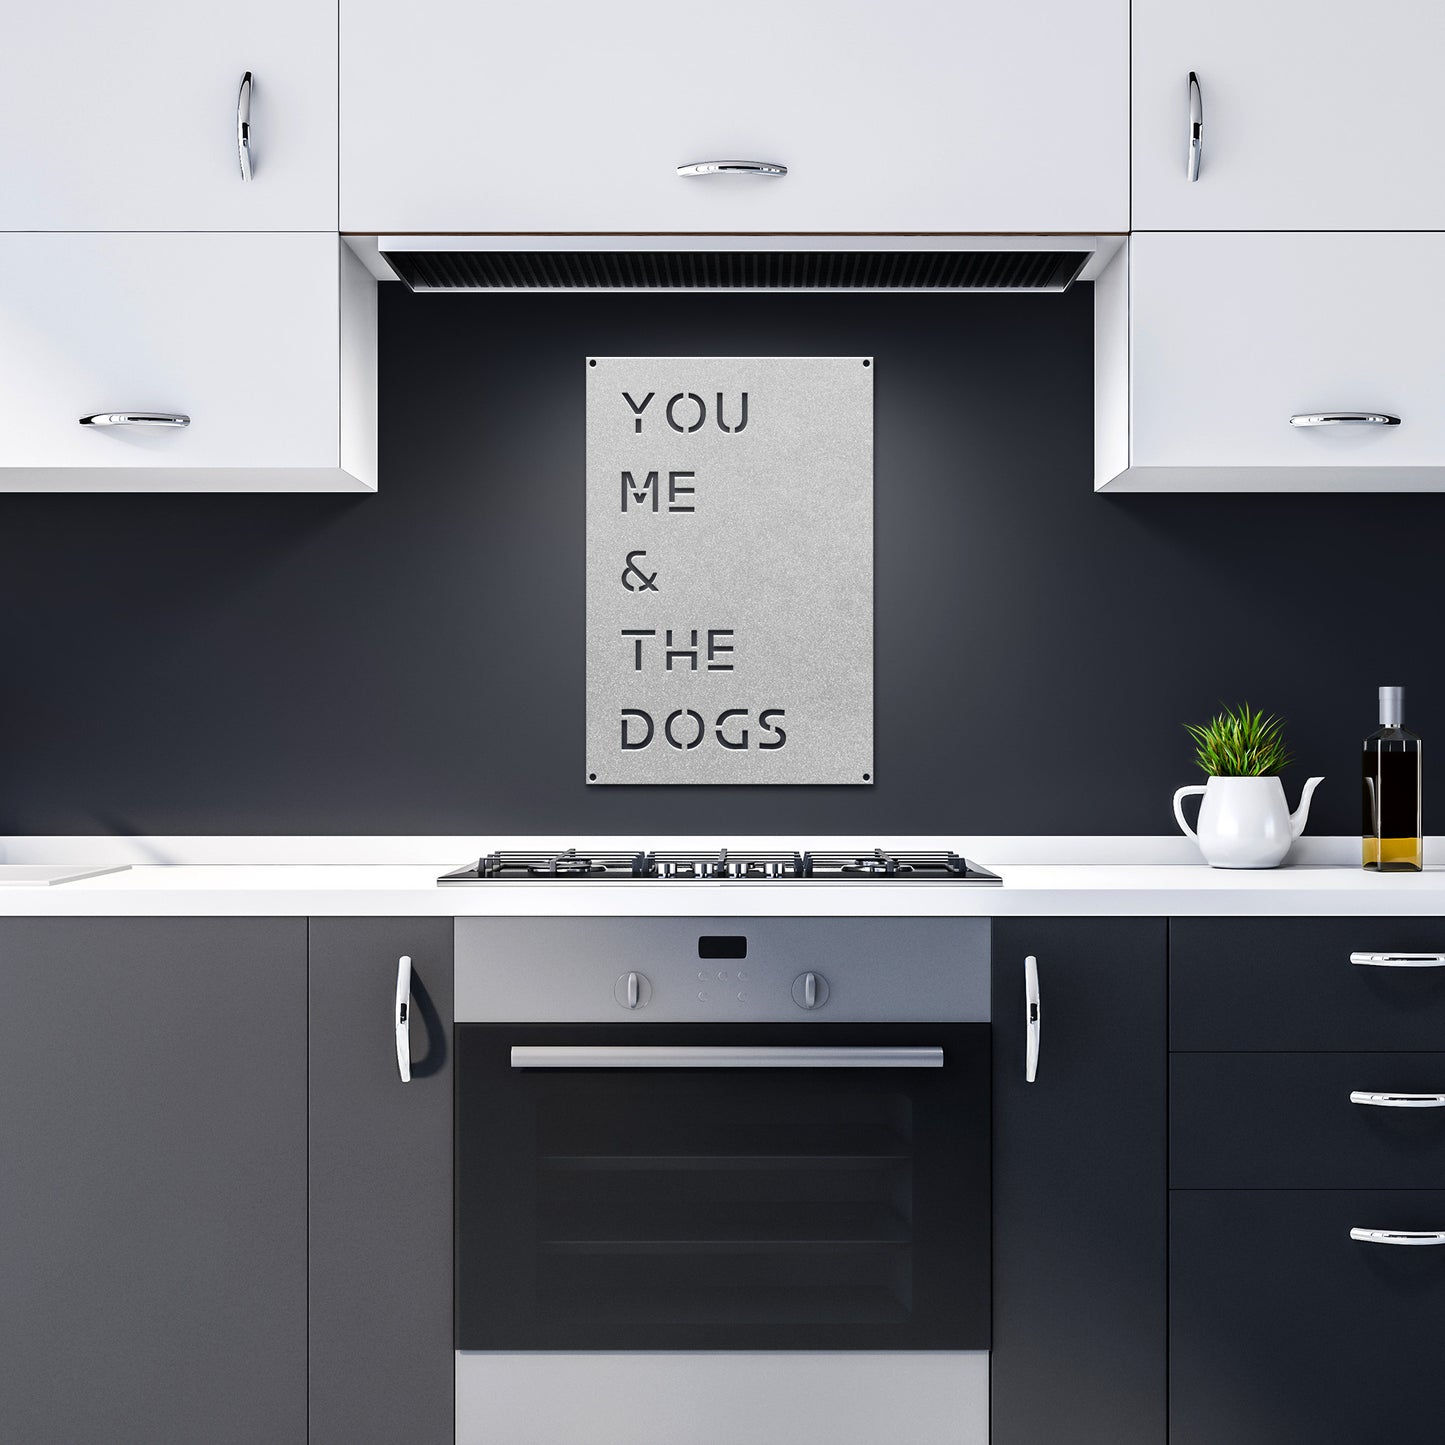 Metal Wall Sign - You, Me & The Dogs